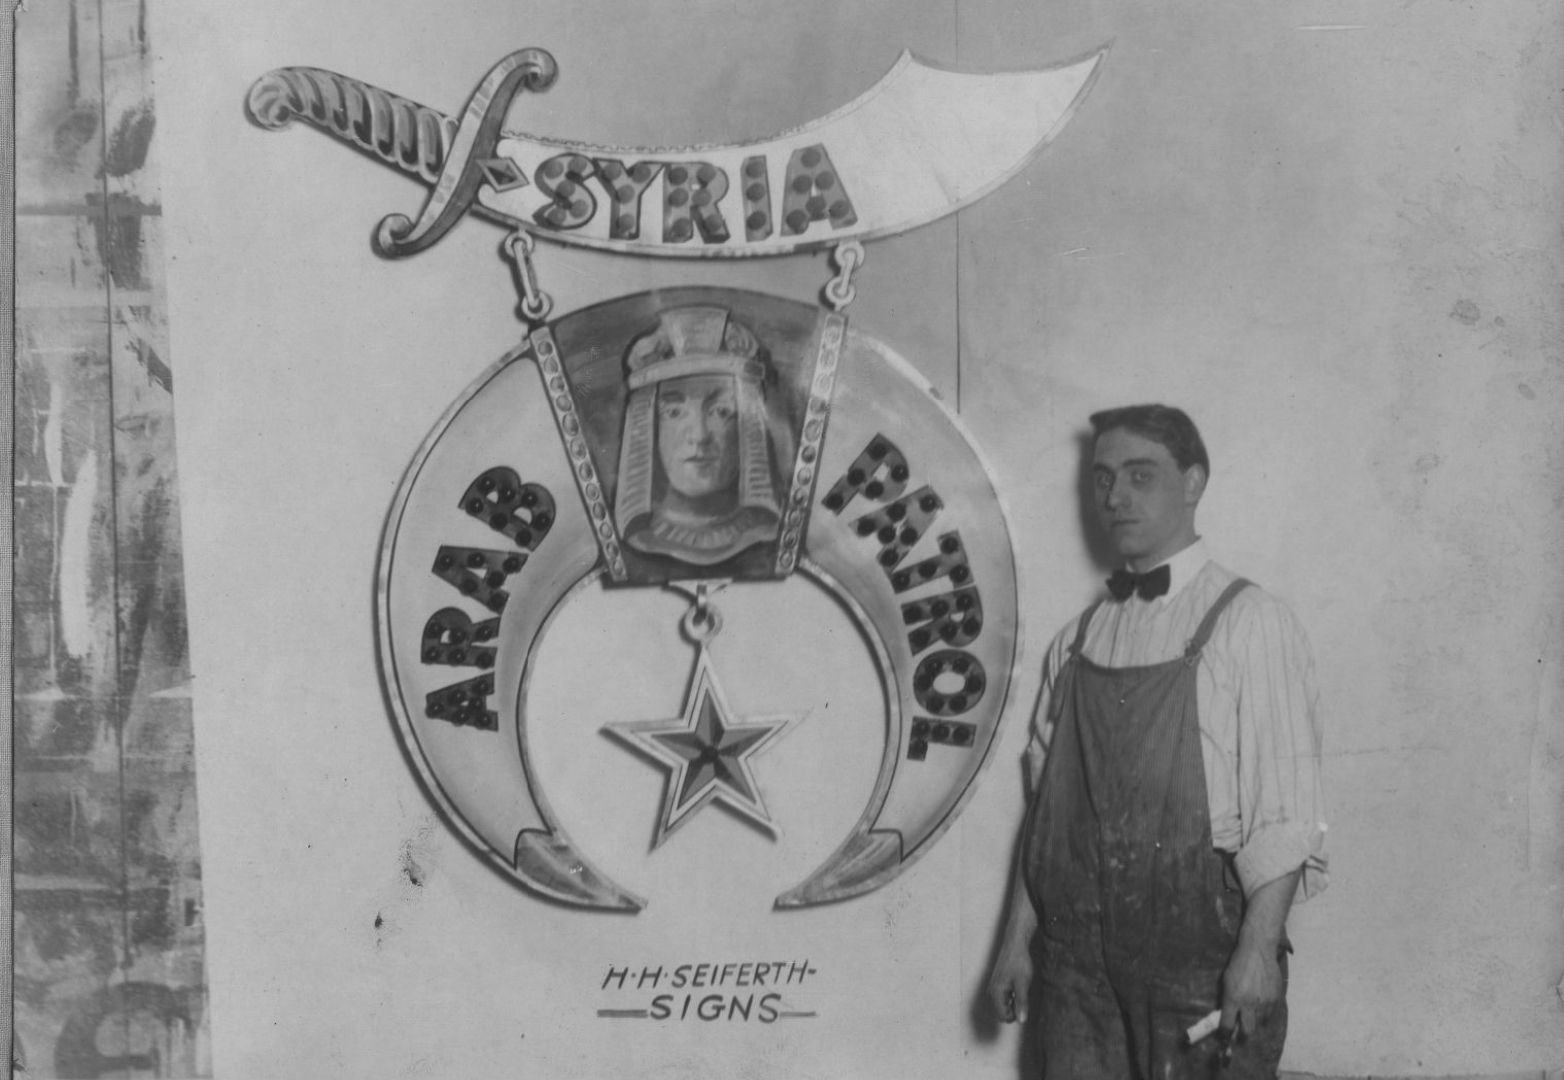 Man in overalls standing in front of a sign painted on a wall.